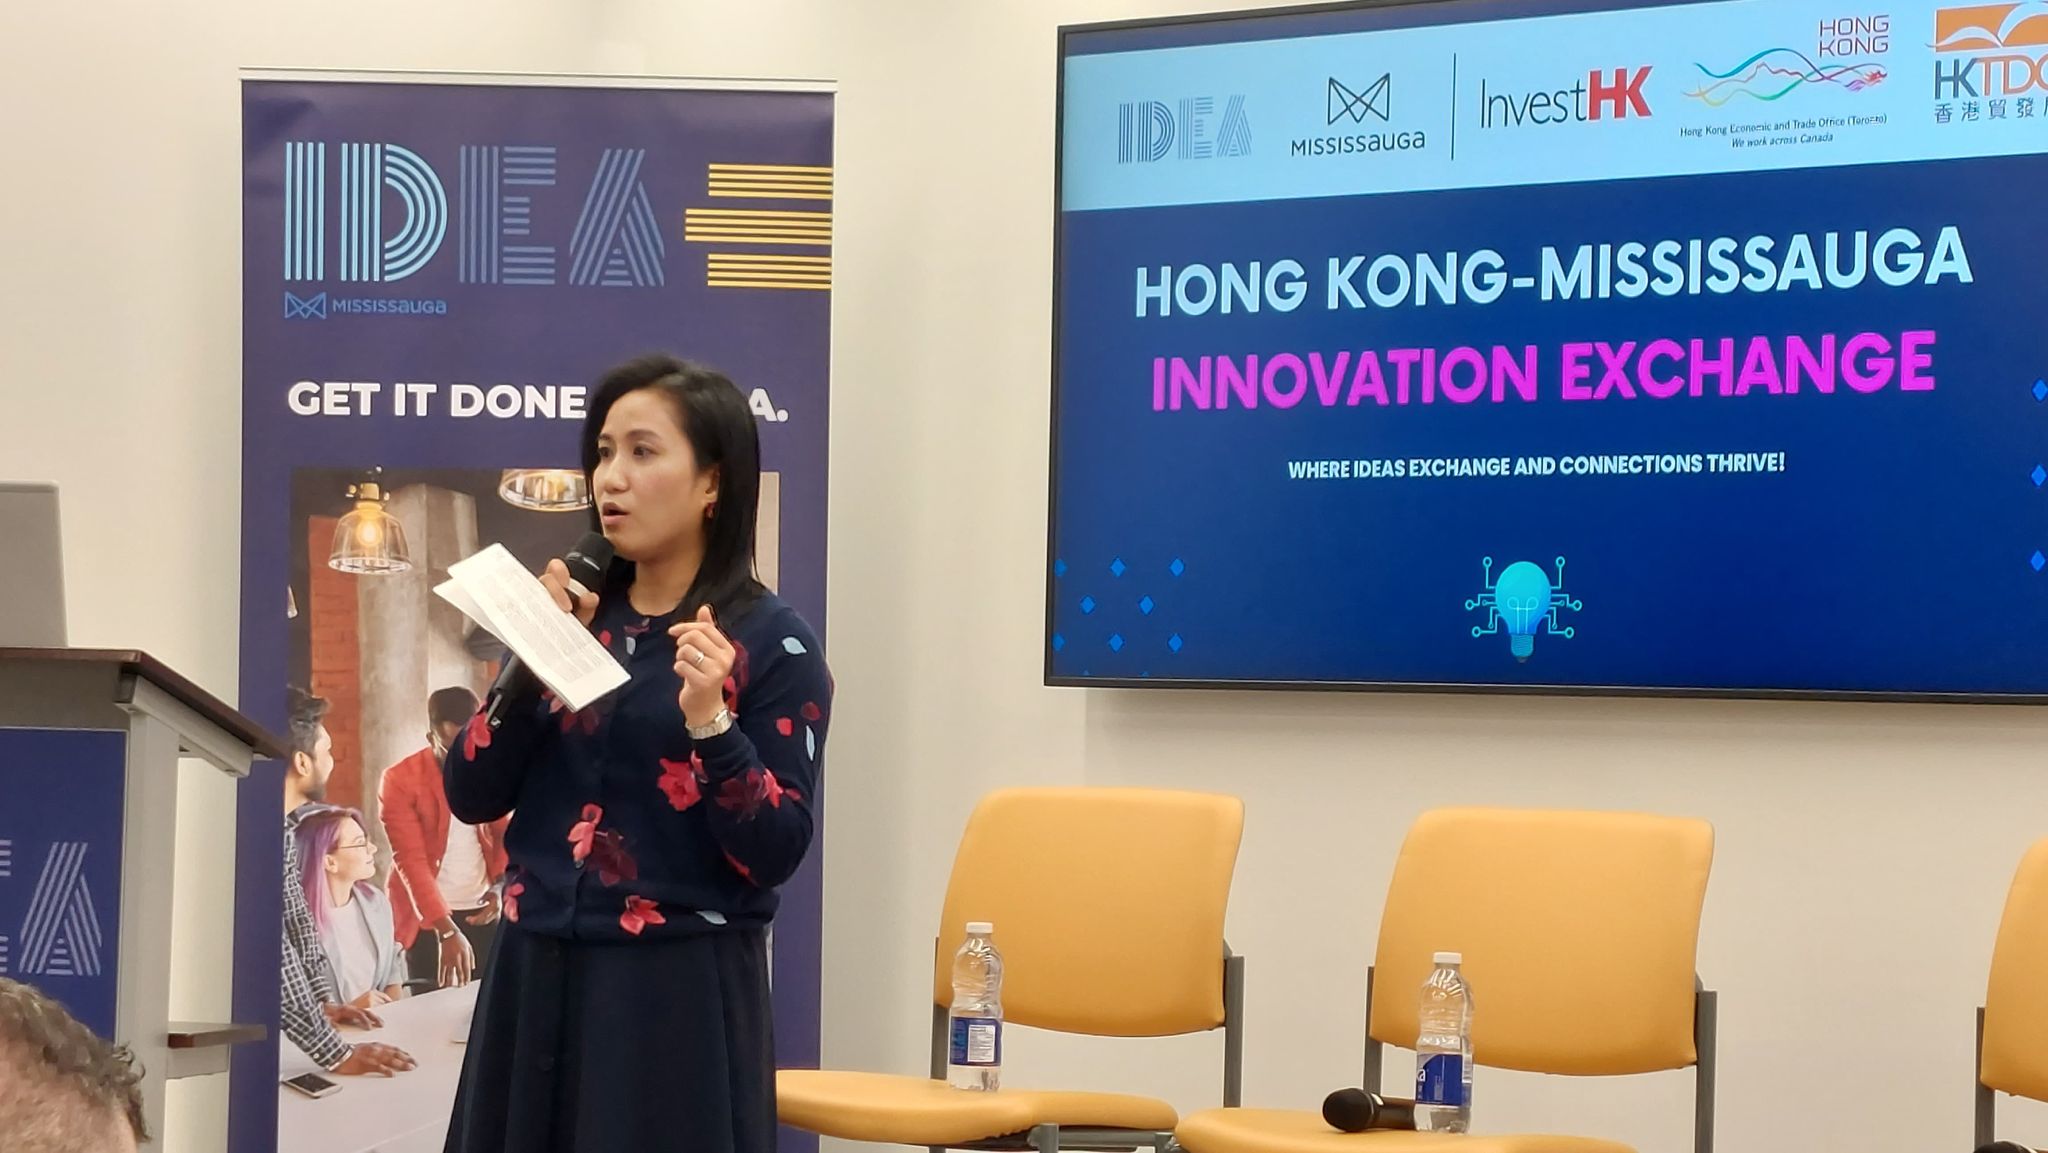 Director of the Hong Kong Economic and Trade Office (Toronto) (HKETO) Ms Emily Mo promotes business opportunities in Hong Kong at the inaugural “Hong Kong-Mississauga Innovation Exchange” event co-organised by the HKETO, Invest Hong Kong (InvestHK) (Canada) and IDEA Mississauga in partnership with the Hong Kong Trade Development Council on April 11.